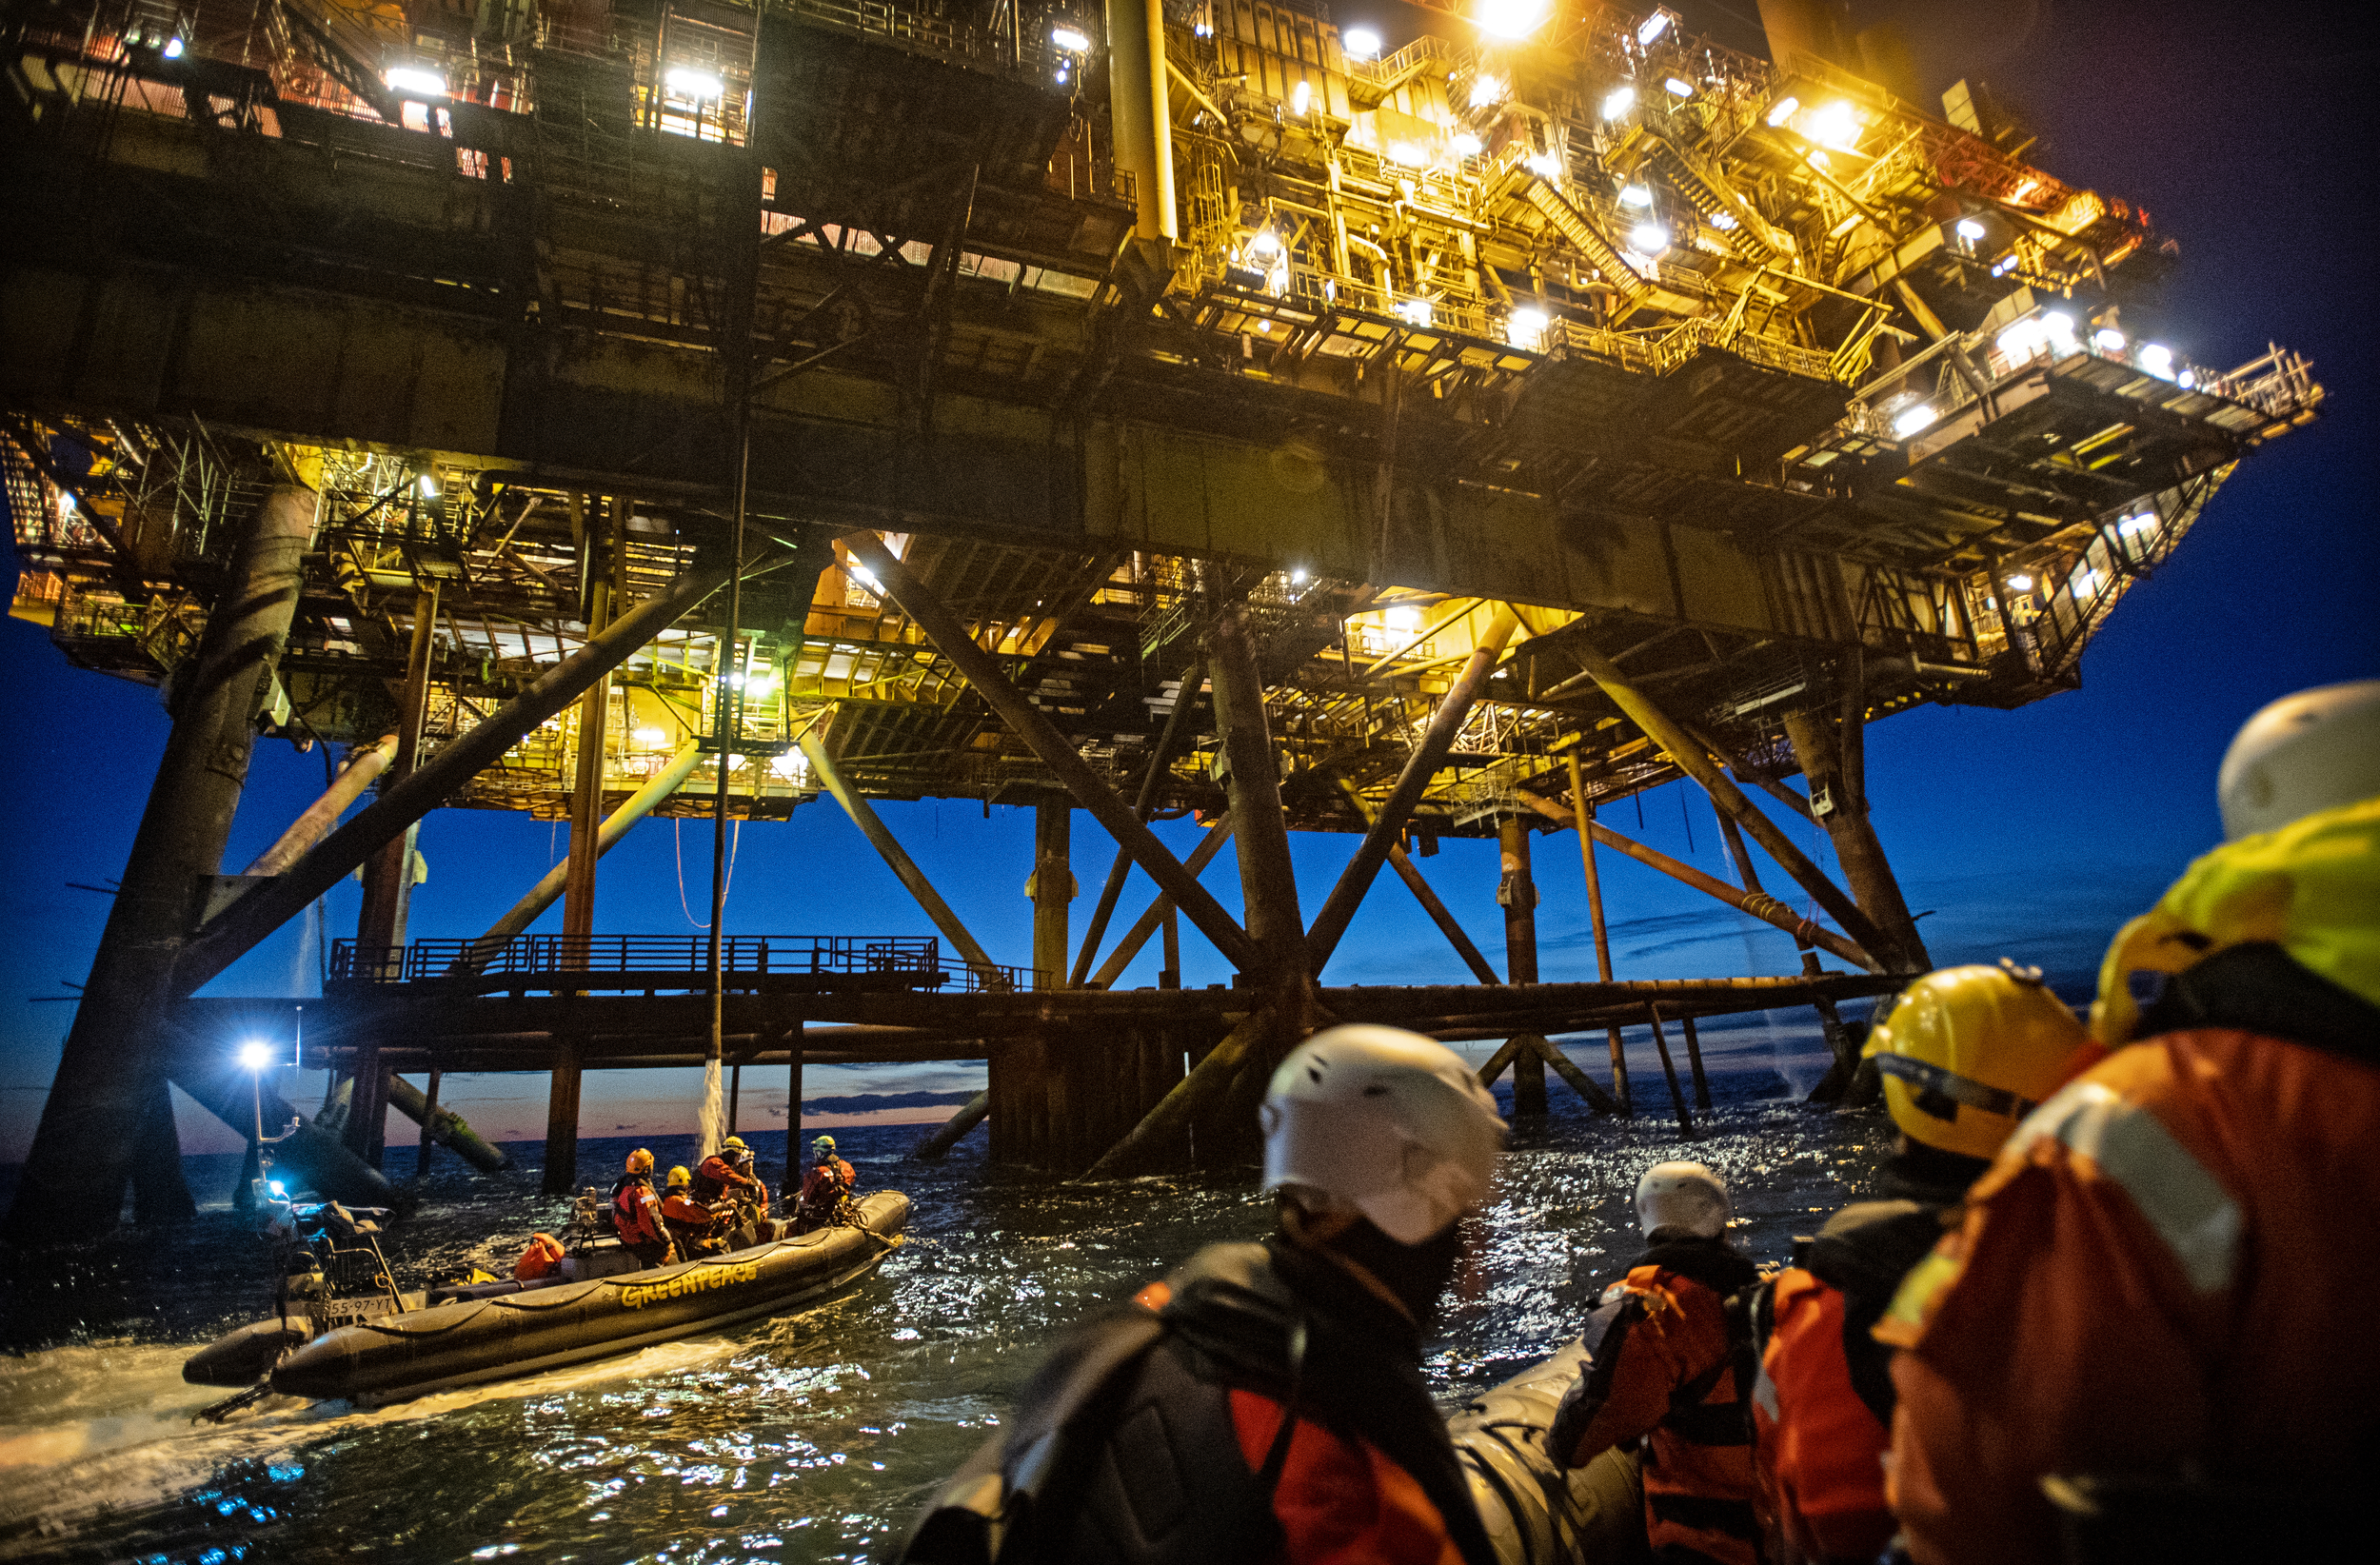 Protests on Shell Brent Oil Platforms in the North Sea